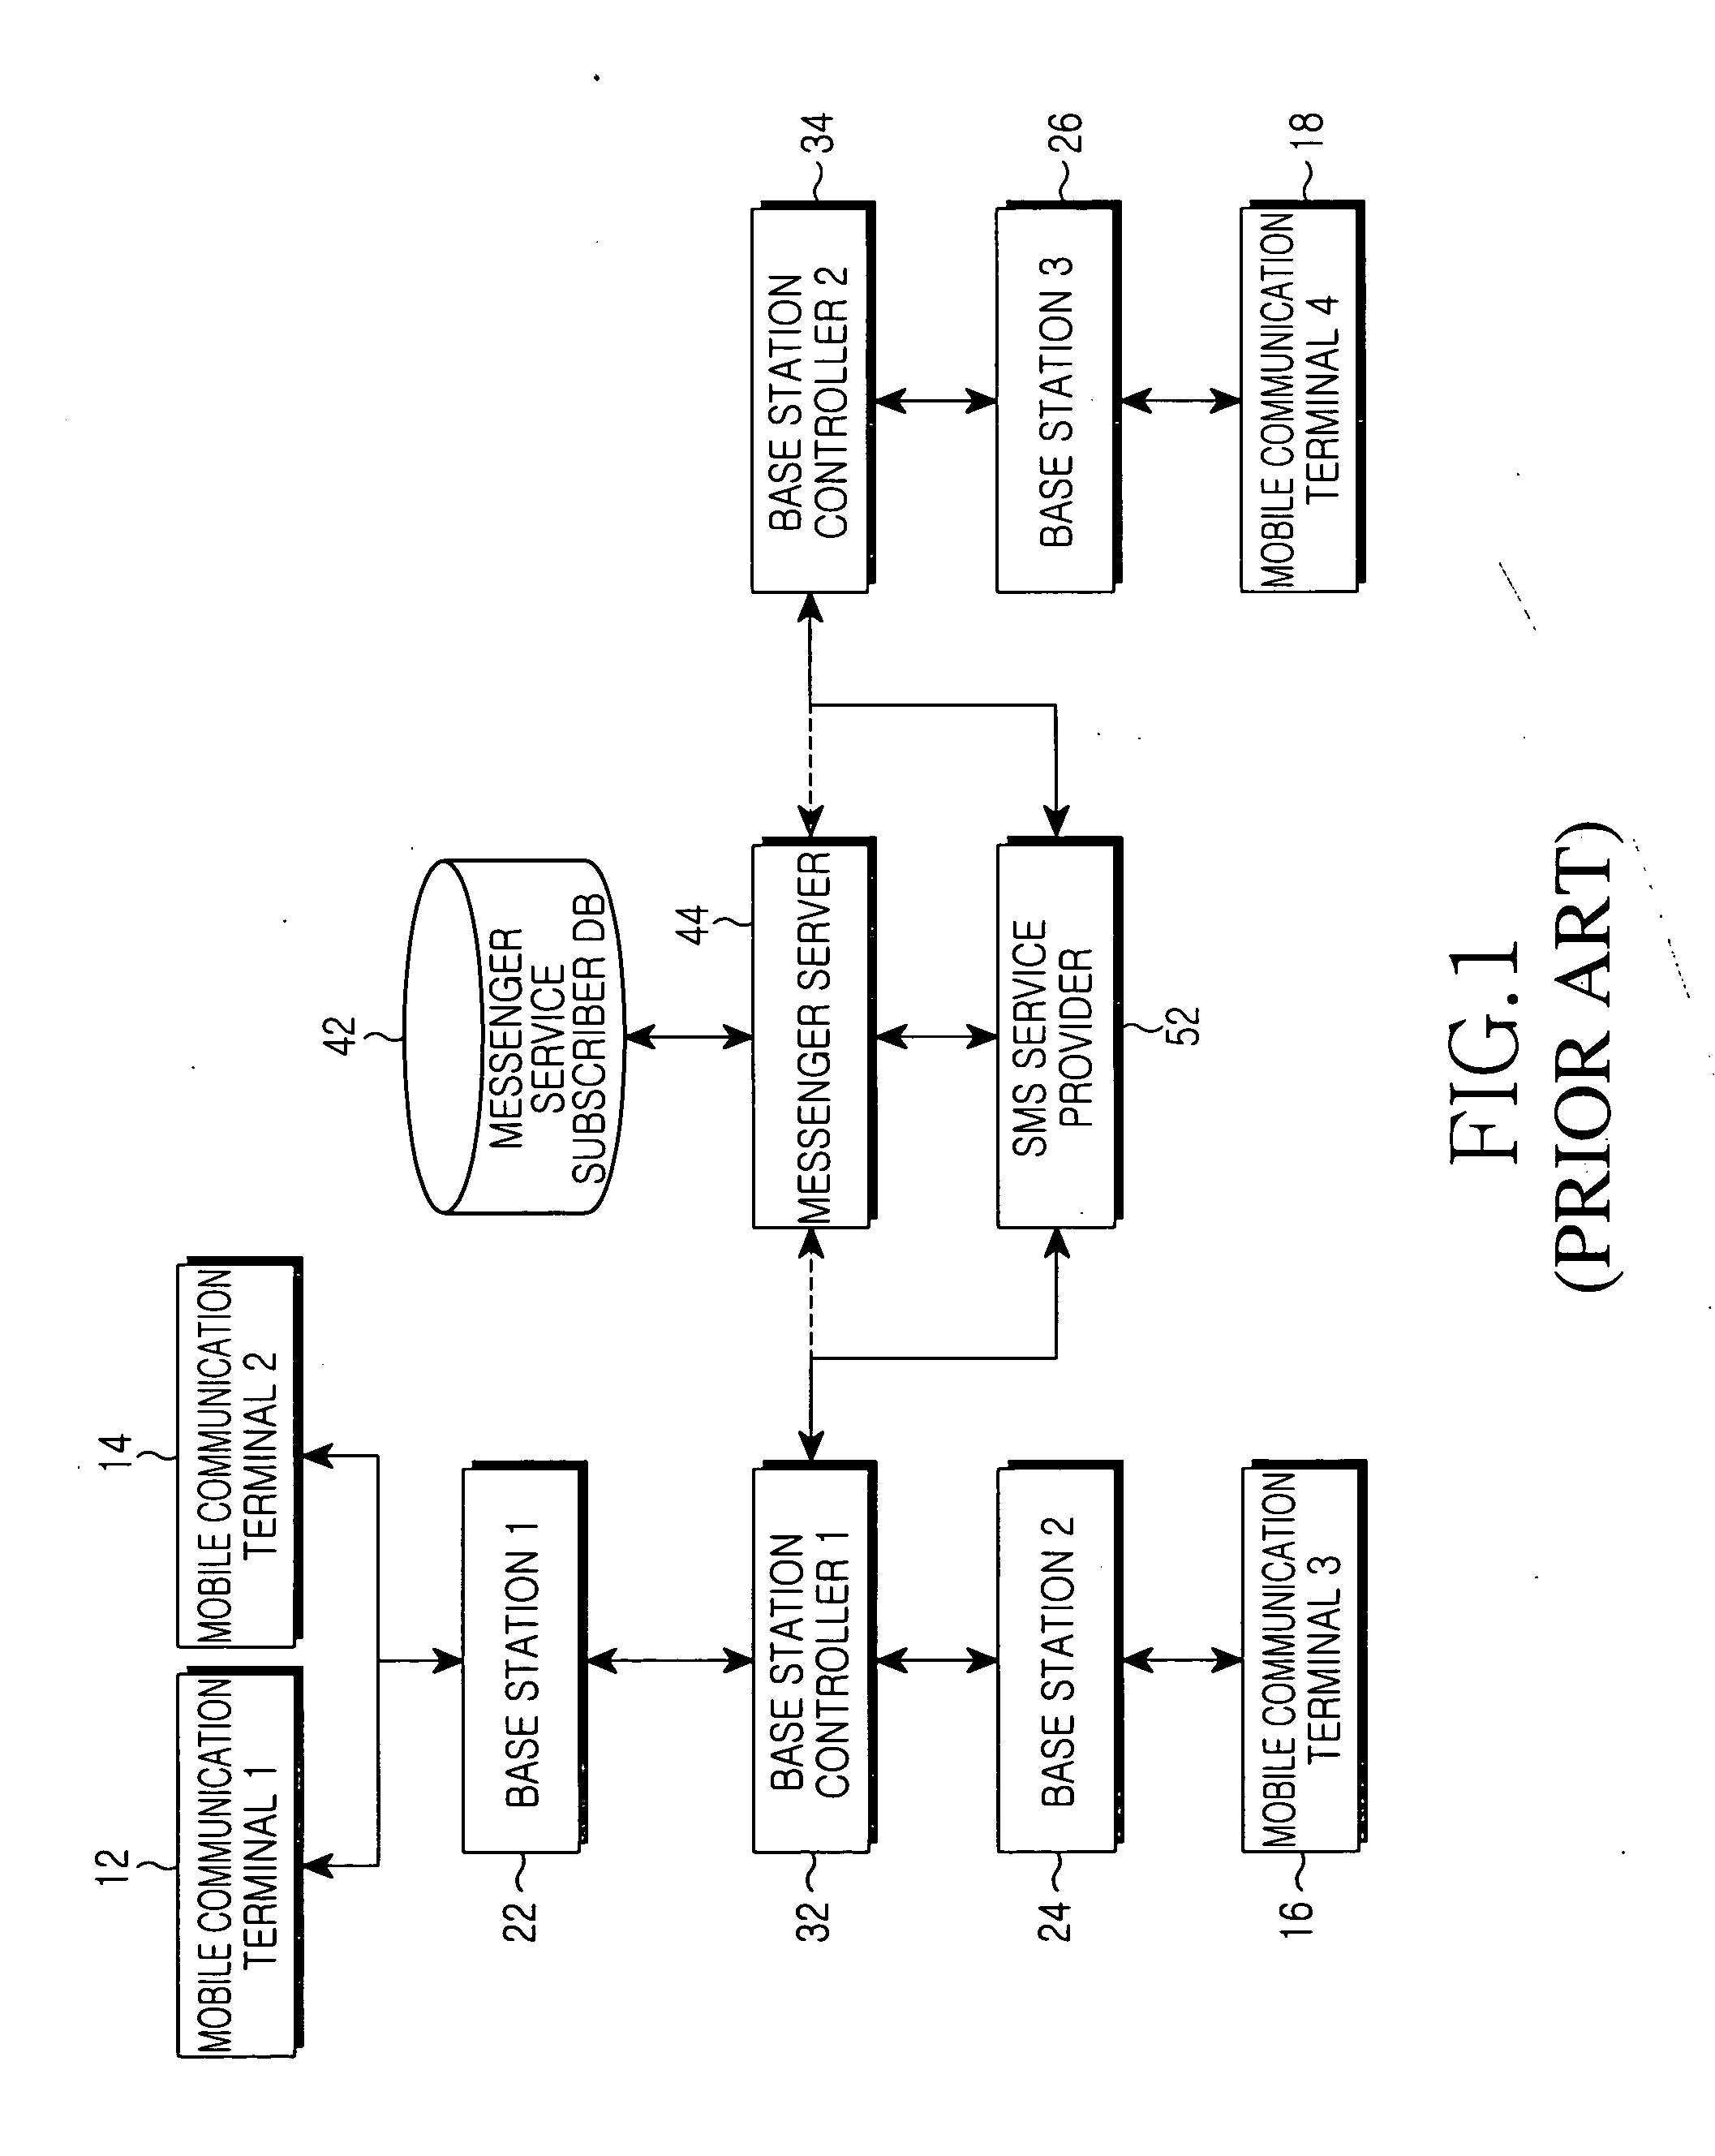 Mobile communication system and method for providing real time messenger service among mobile communication terminals